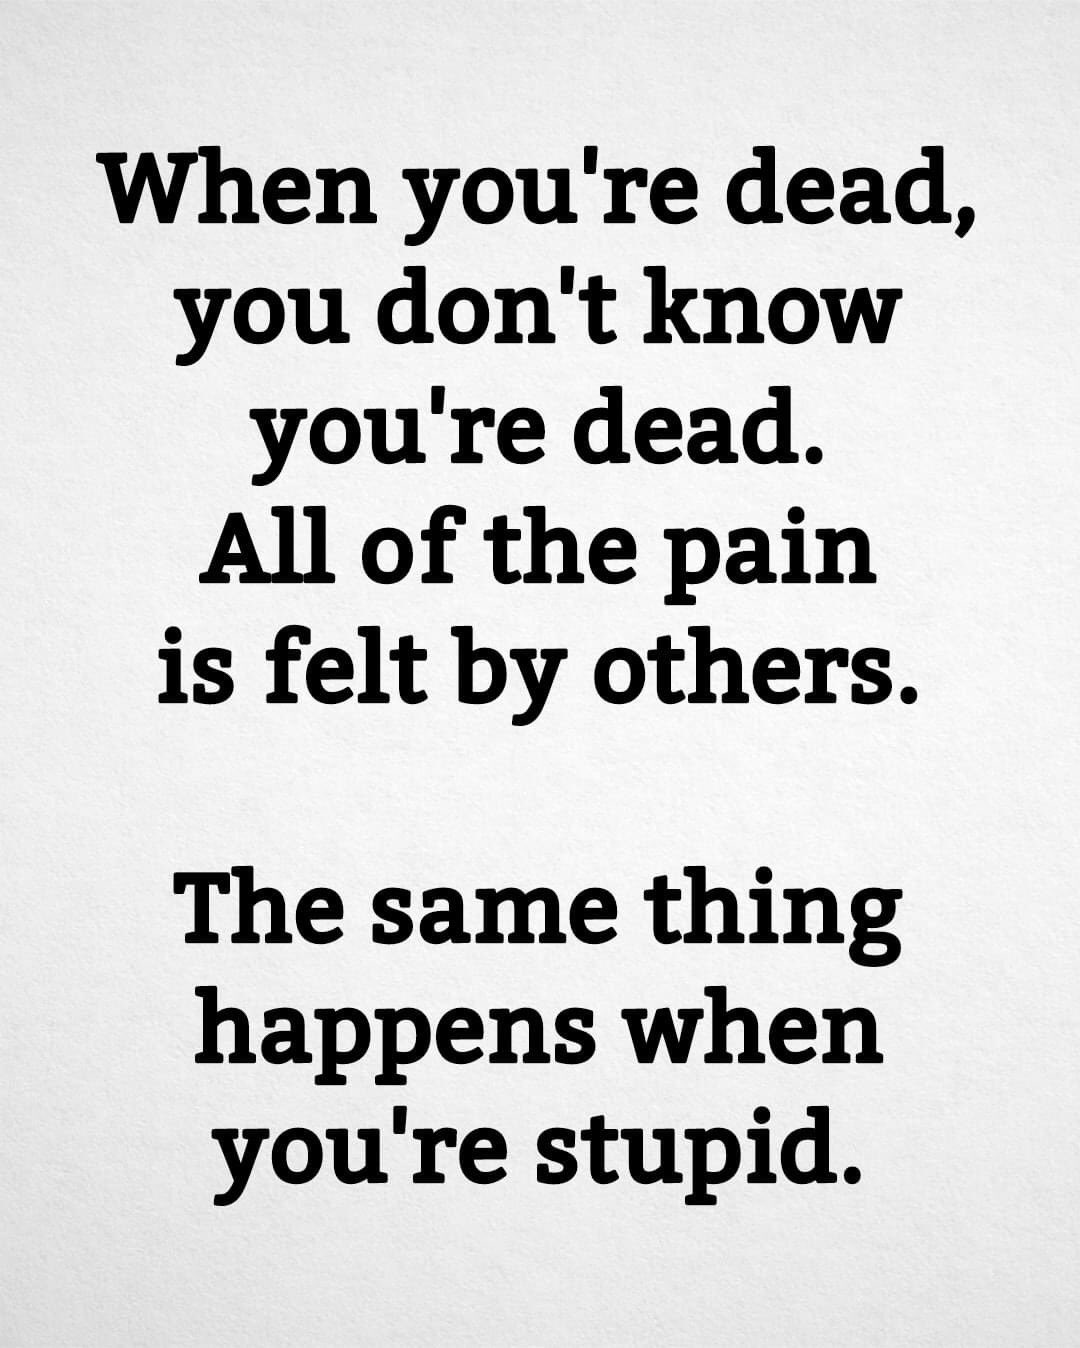 May be an image of text that says 'When you're dead, you don't know you're dead. All of the pain is felt by others. The same thing happens when you're stupid.'